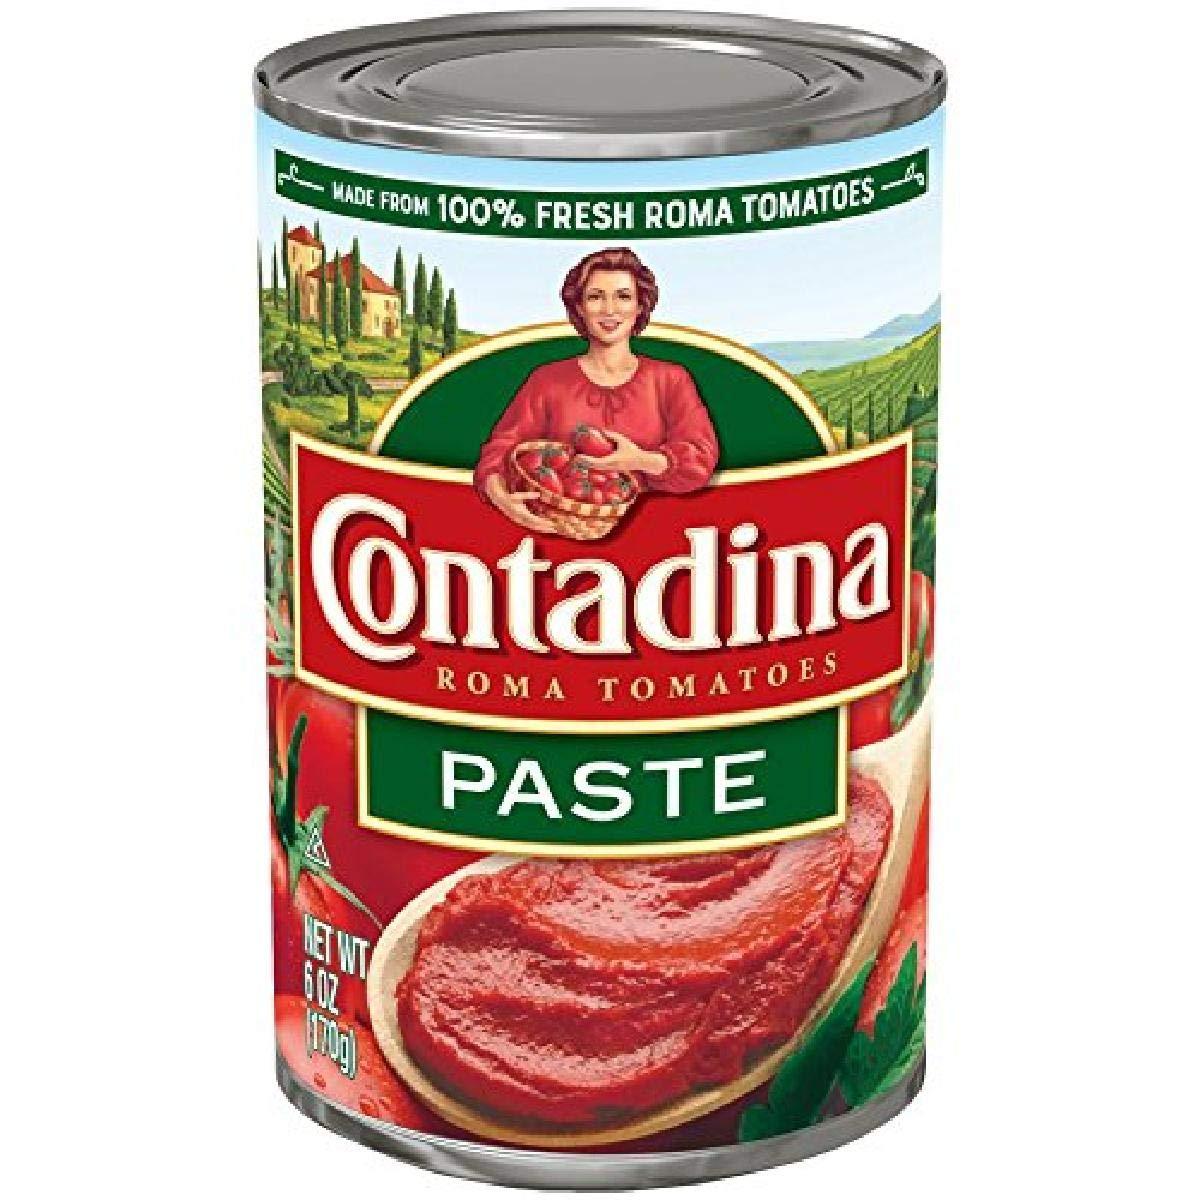 12 Contadina Canned Roma Tomatoes Paste for $10.20 Shipped